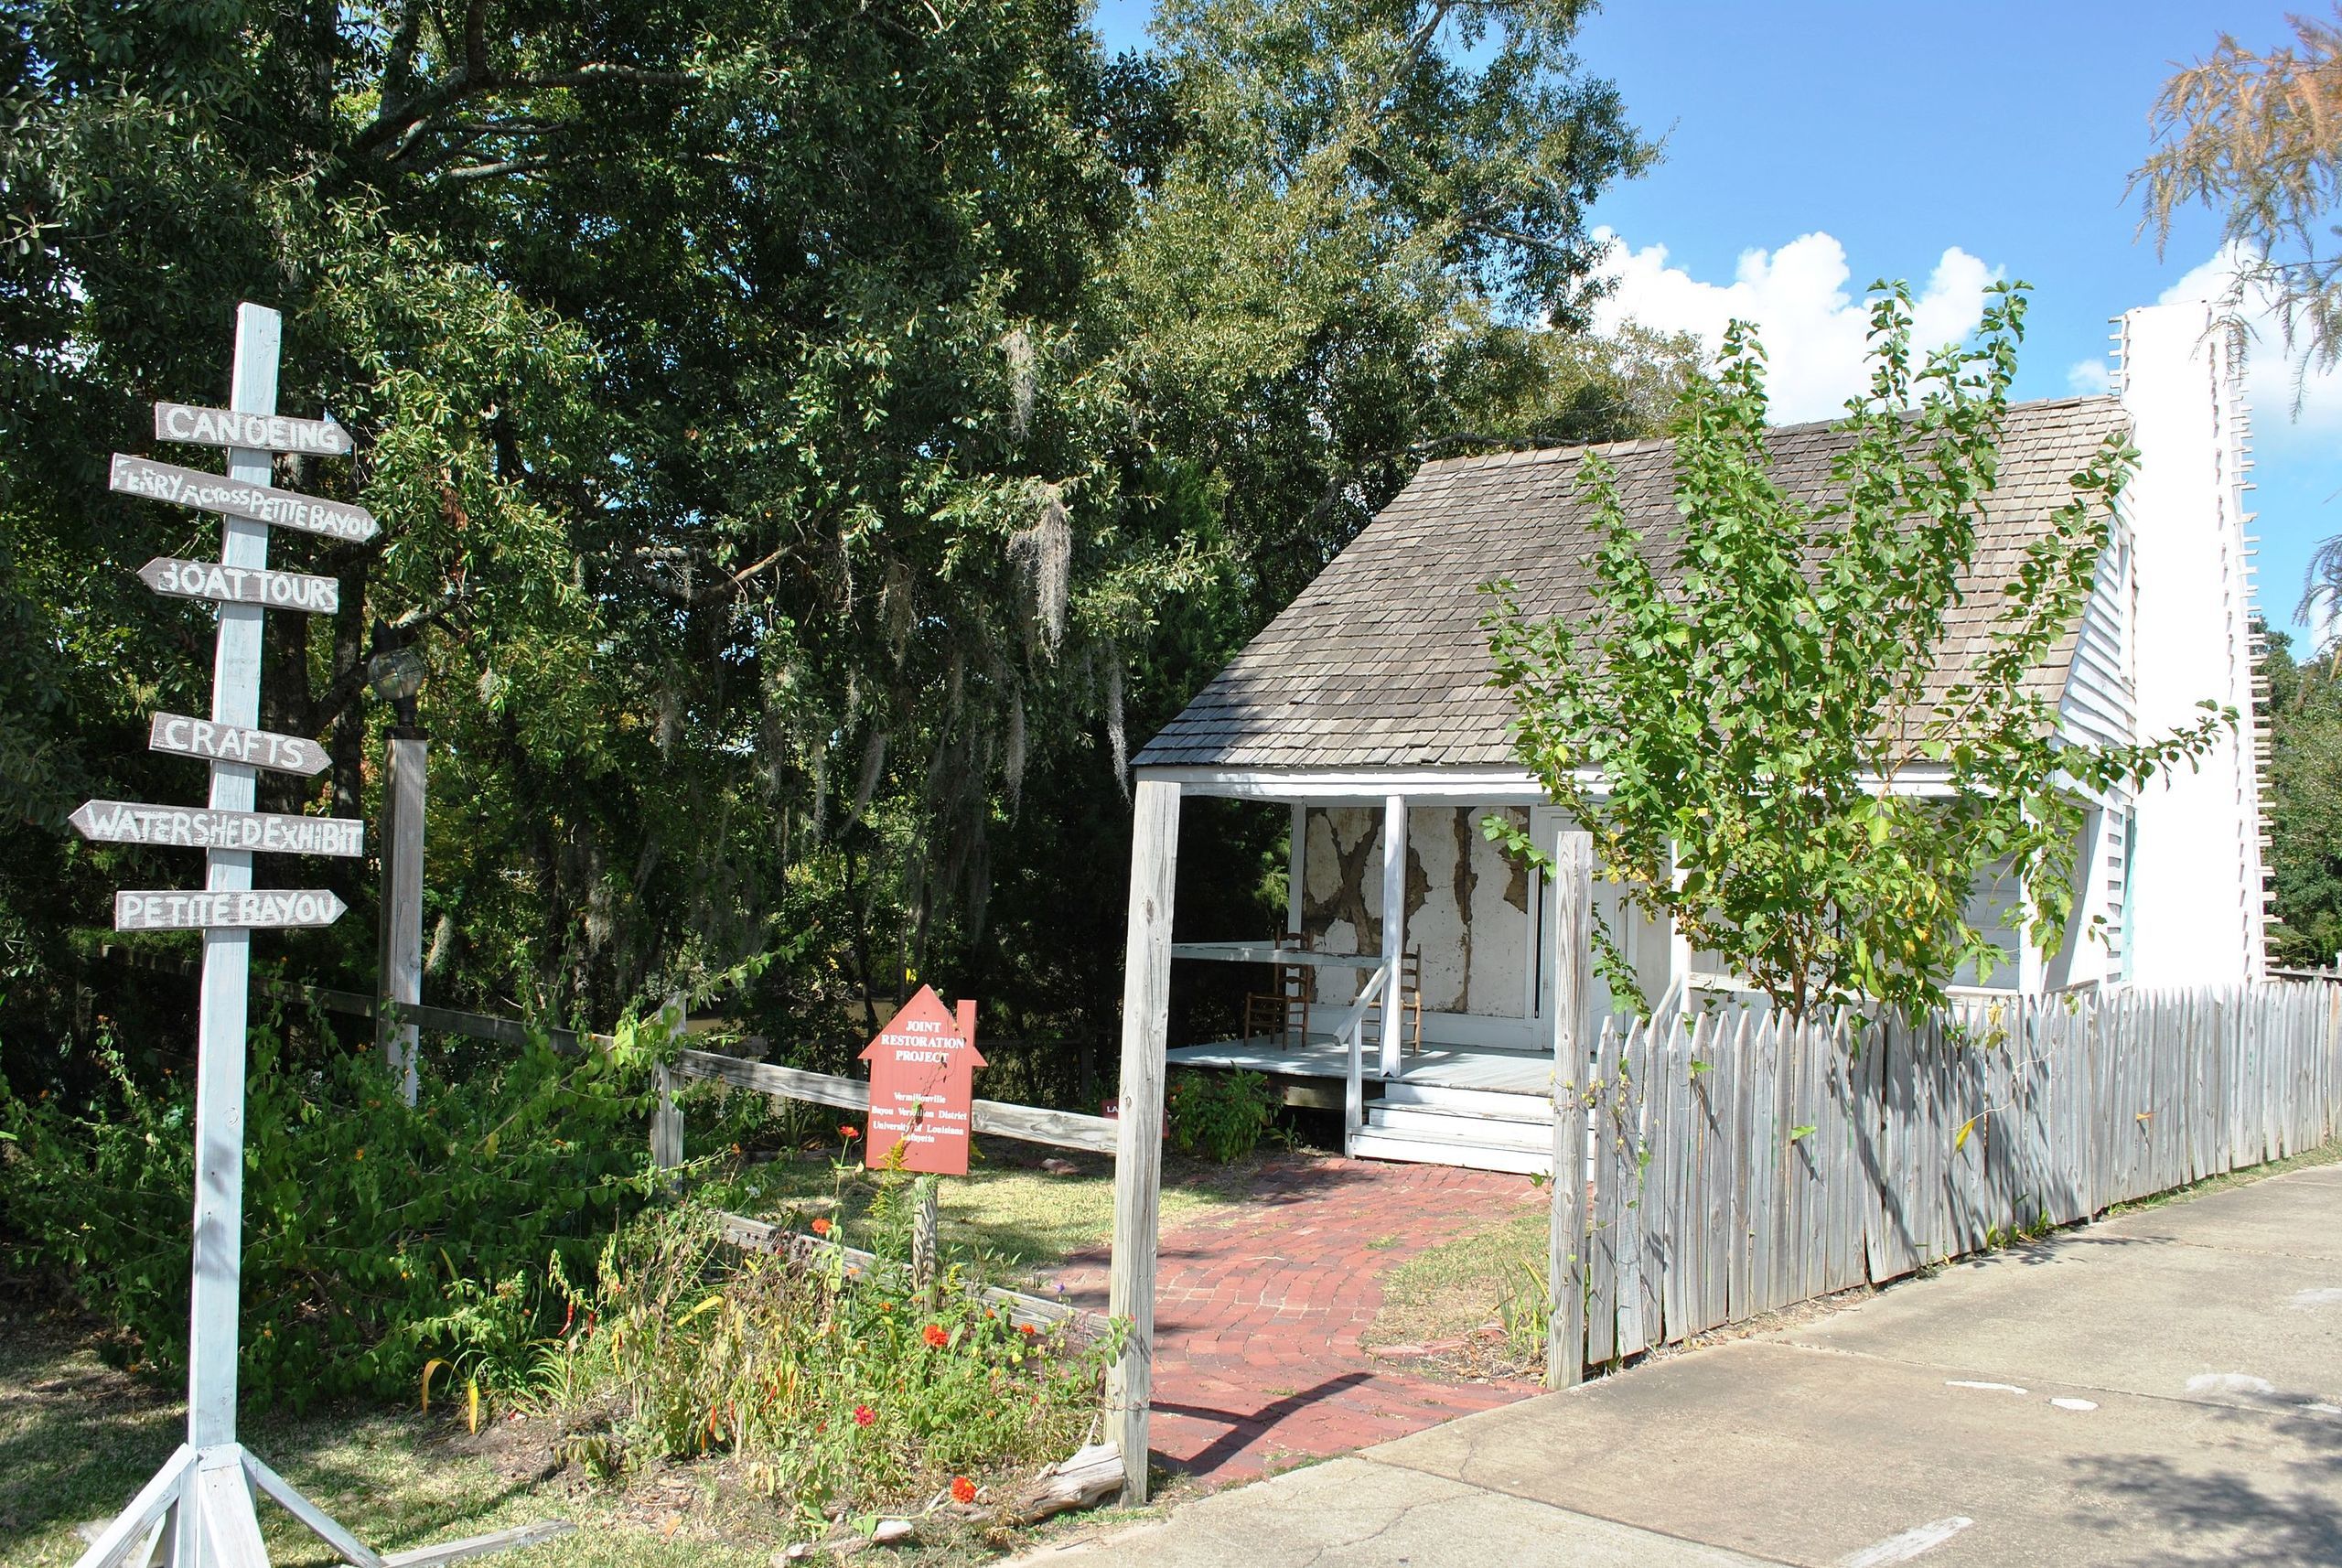 <p><strong>Location:</strong> Lafayette, Louisiana <br><strong>Era:</strong> 1700s-1800s <br><strong>What to do:</strong> At Vermilionville, visitors learn about a mashup of Acadian, Native American, and Creole culture. There are several restored homes and structures, as well as more than a dozen local artisans <a href="https://www.bayouvermiliondistrict.org/vermilionville/">demonstrating period crafts</a> like spinning cotton and carving wood.  <br><strong>Cost:</strong> $10 for adults; $8 for seniors; $6 for children</p>